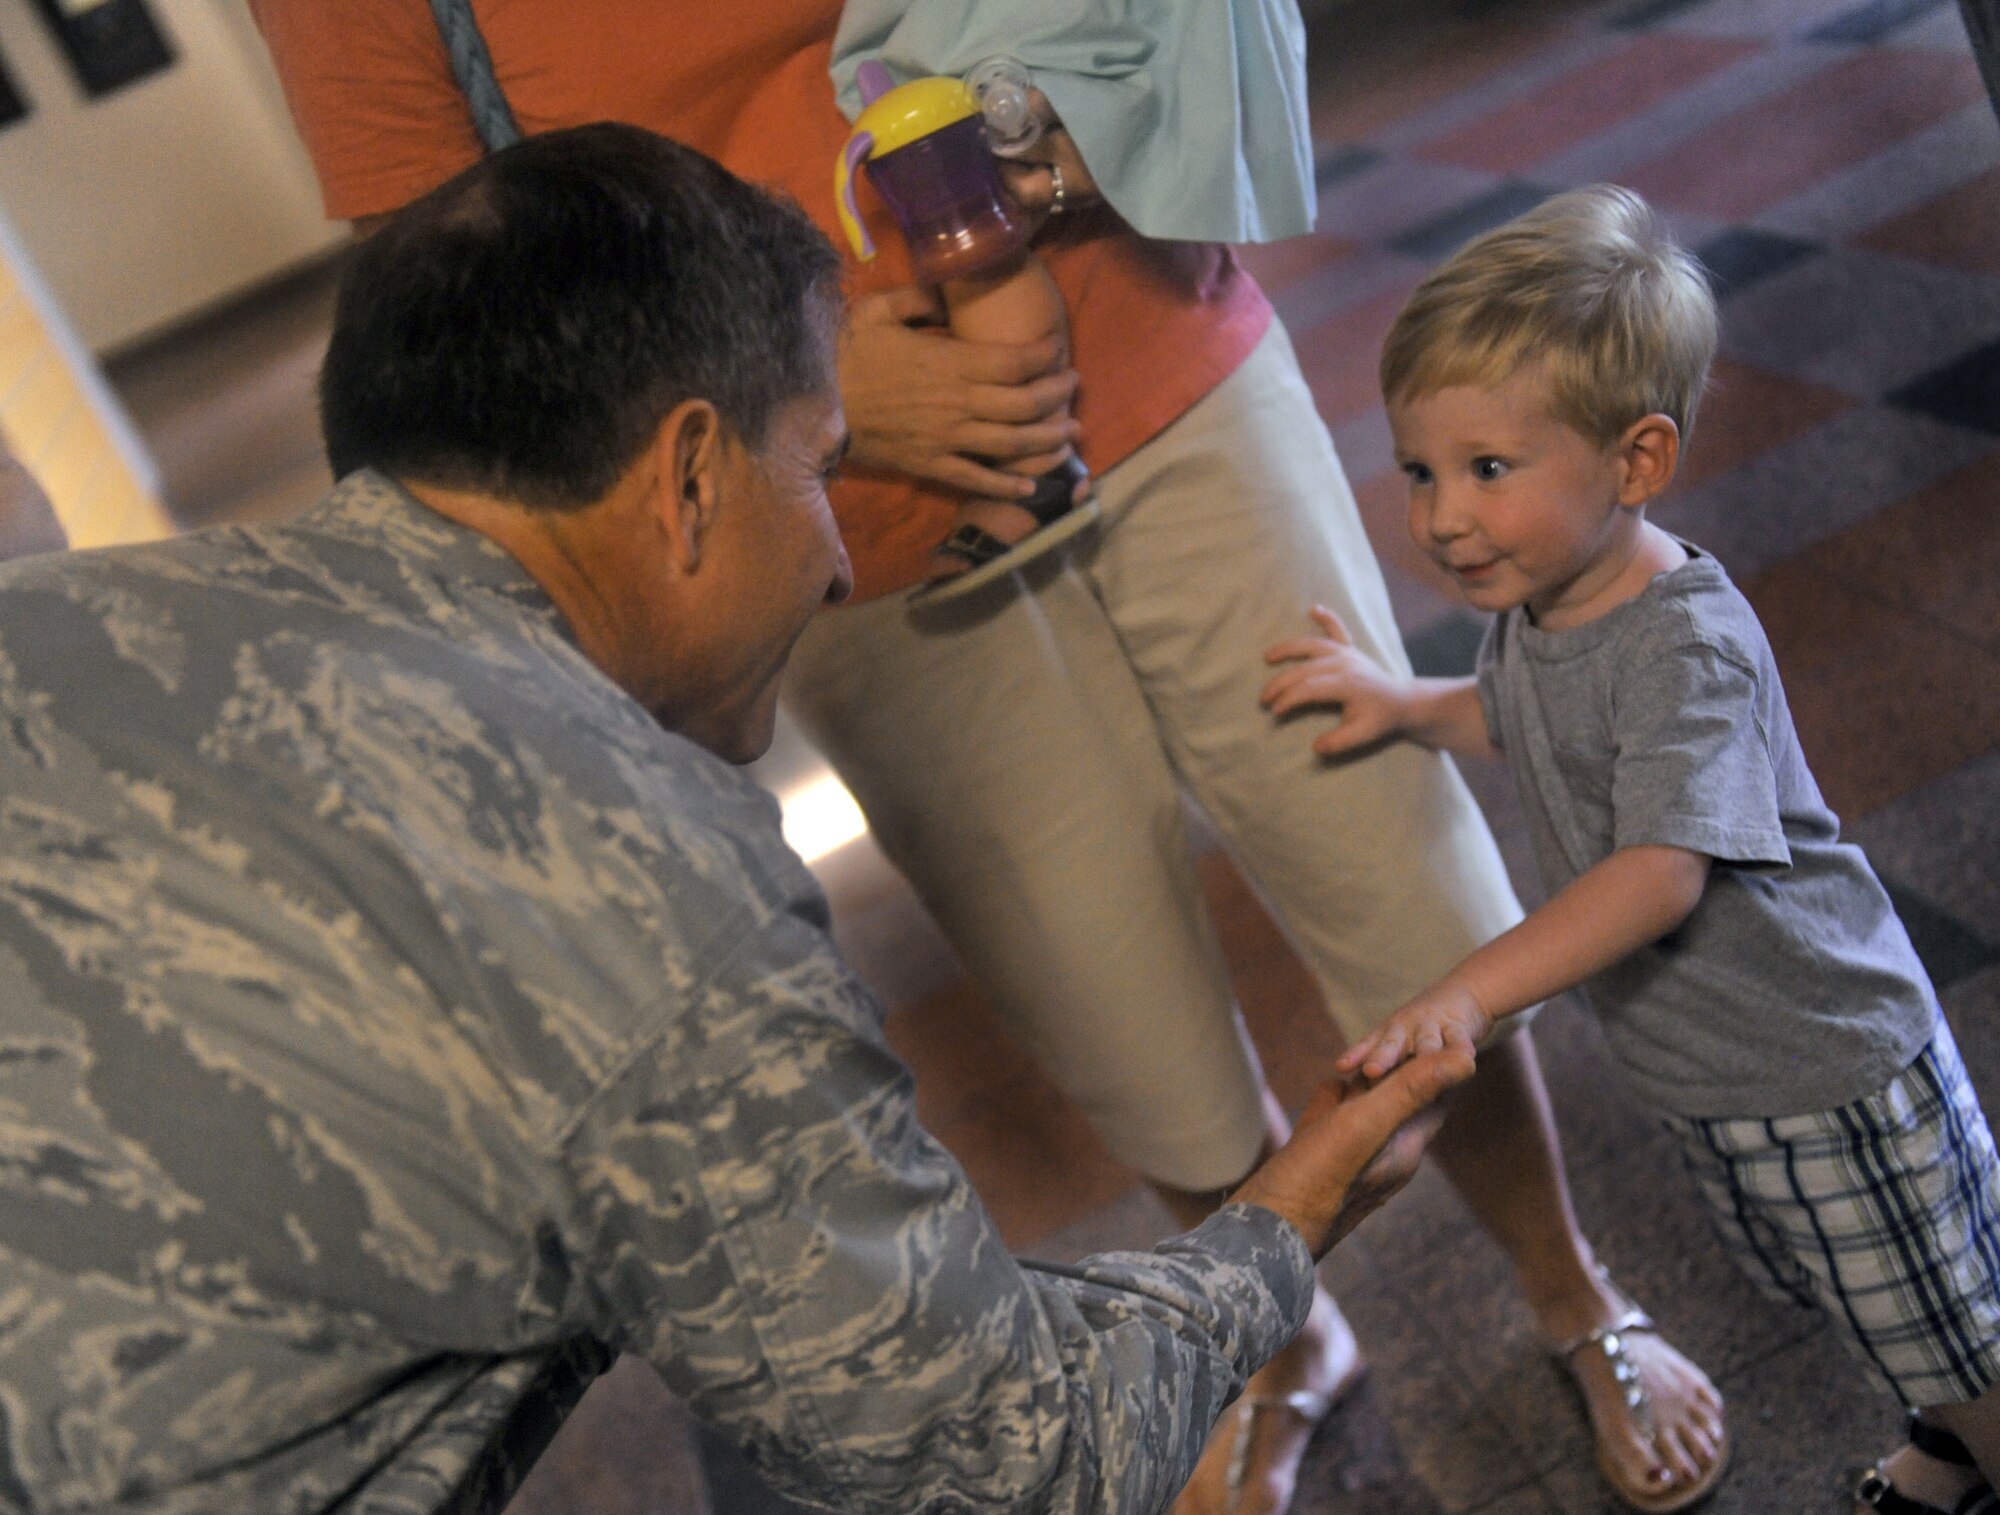 Maj. Gen. David Goldfein gives a high five to Noah Kunkel, the son of Lt. Col. Tom Kunkel, Sept. 1, 2010, during a visit to Moody Air Force Base, Ga. General Goldfein was rescued by Colonel Kunkel when his aircraft was shot down over enemy territory in May 1999. General Goldfein is the Air Combat Command director of air and space operations. Colonel Kunkel is the 41st Rescue Squadron commander. (U.S. Air Force photo/Airman 1st Class Benjamin Wiseman)
